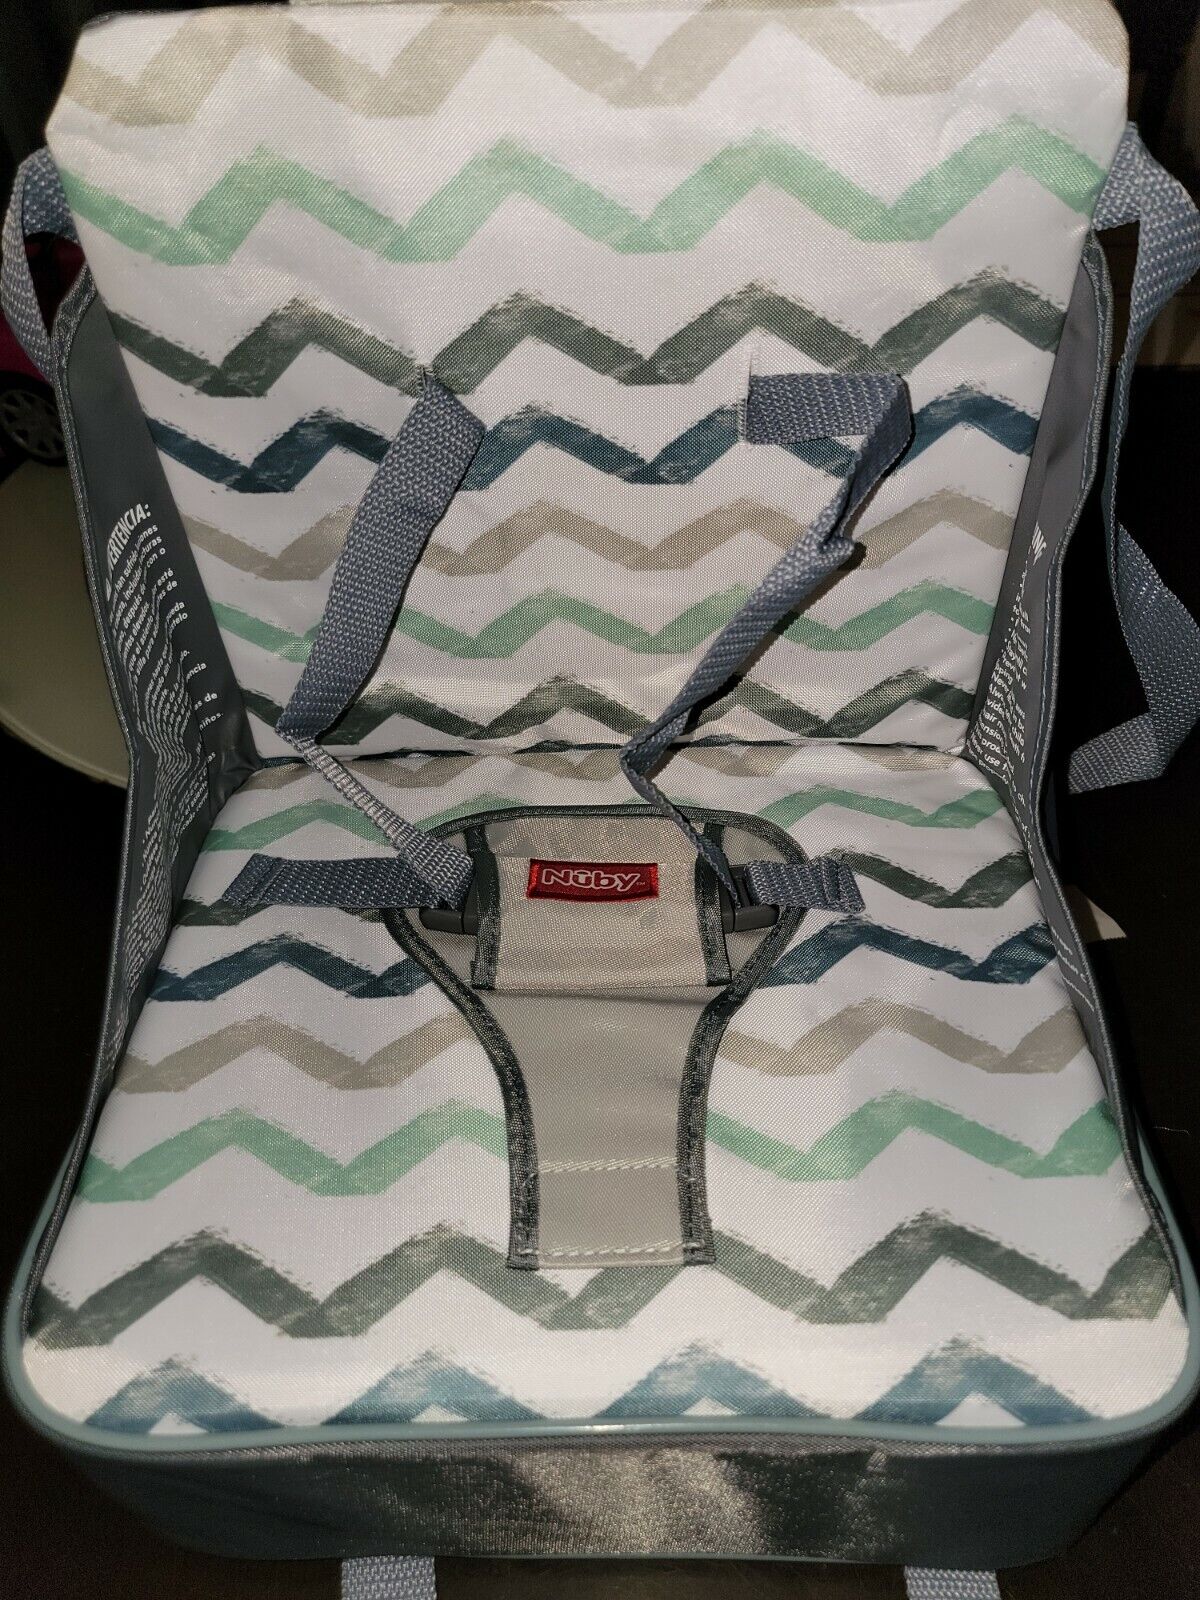 Nuby Easy Go Safety Lightweight High Chair Booster Seat, Great For Travel, Gray